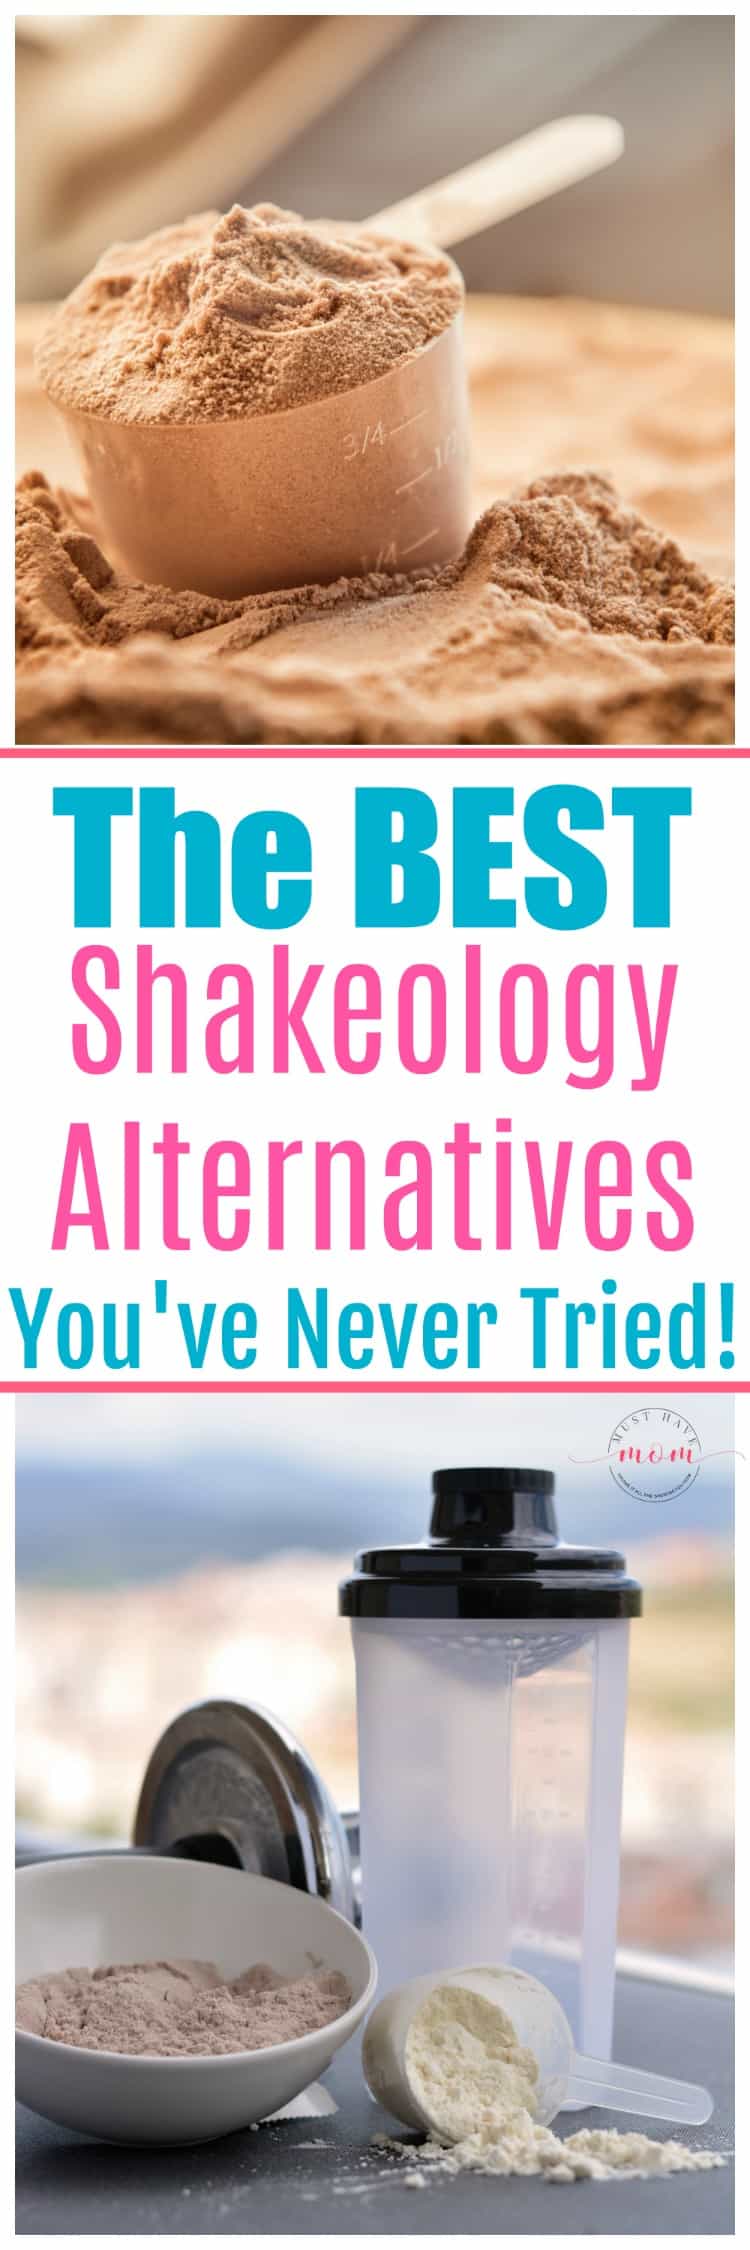 5 of the BEST Shakeology alternatives that you've never tried! Better taste, lower cost, same benefits!